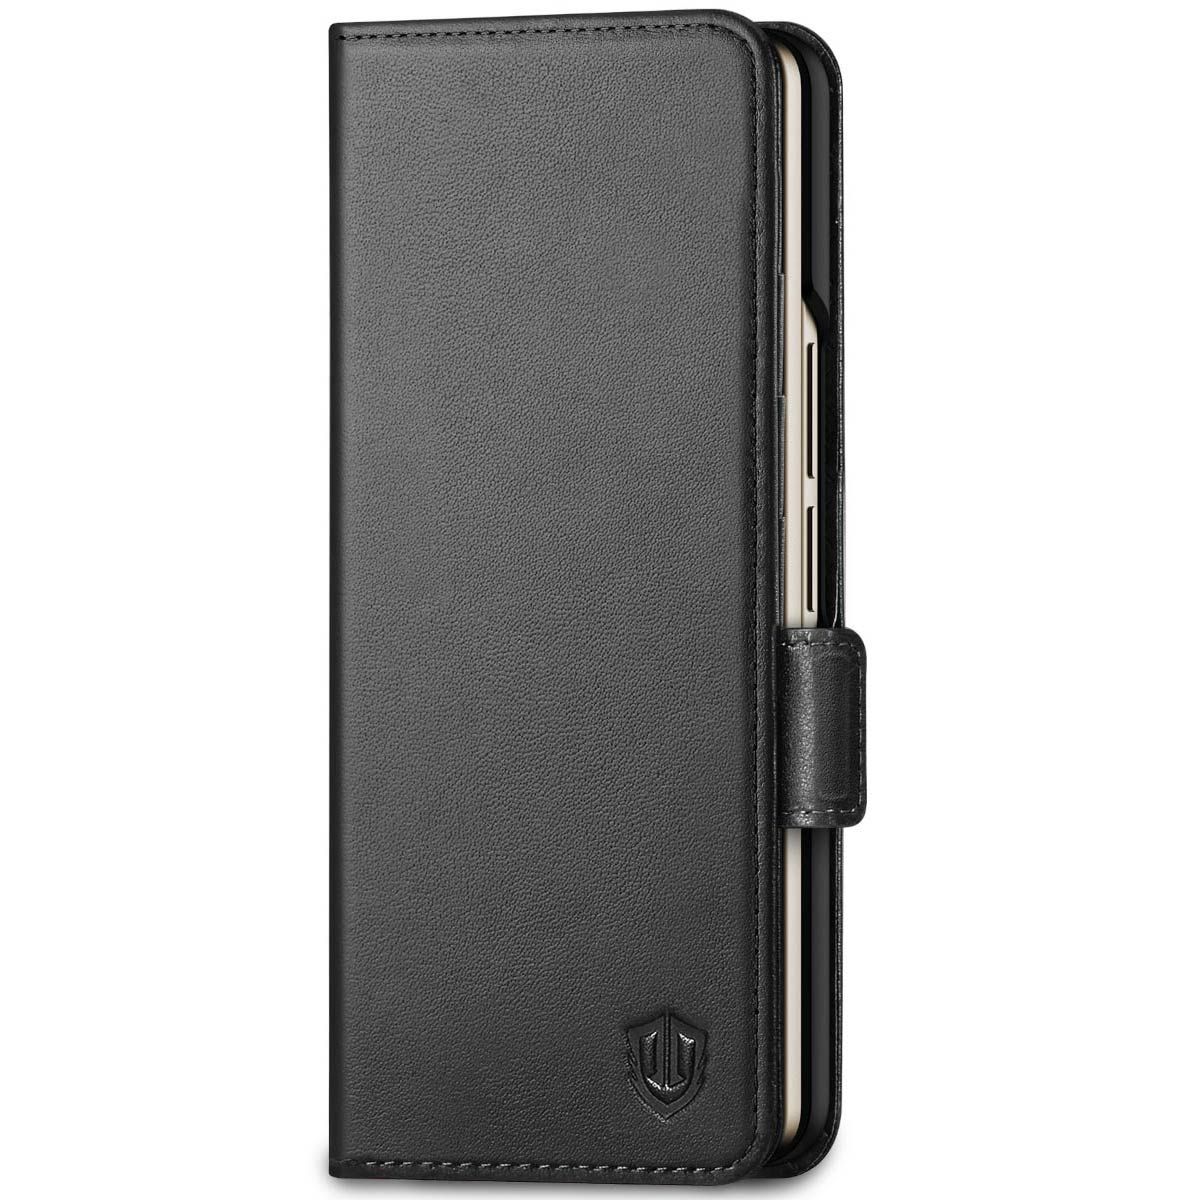 Premium Leather Galaxy Z Fold 2 Case / 6 Colors / by 